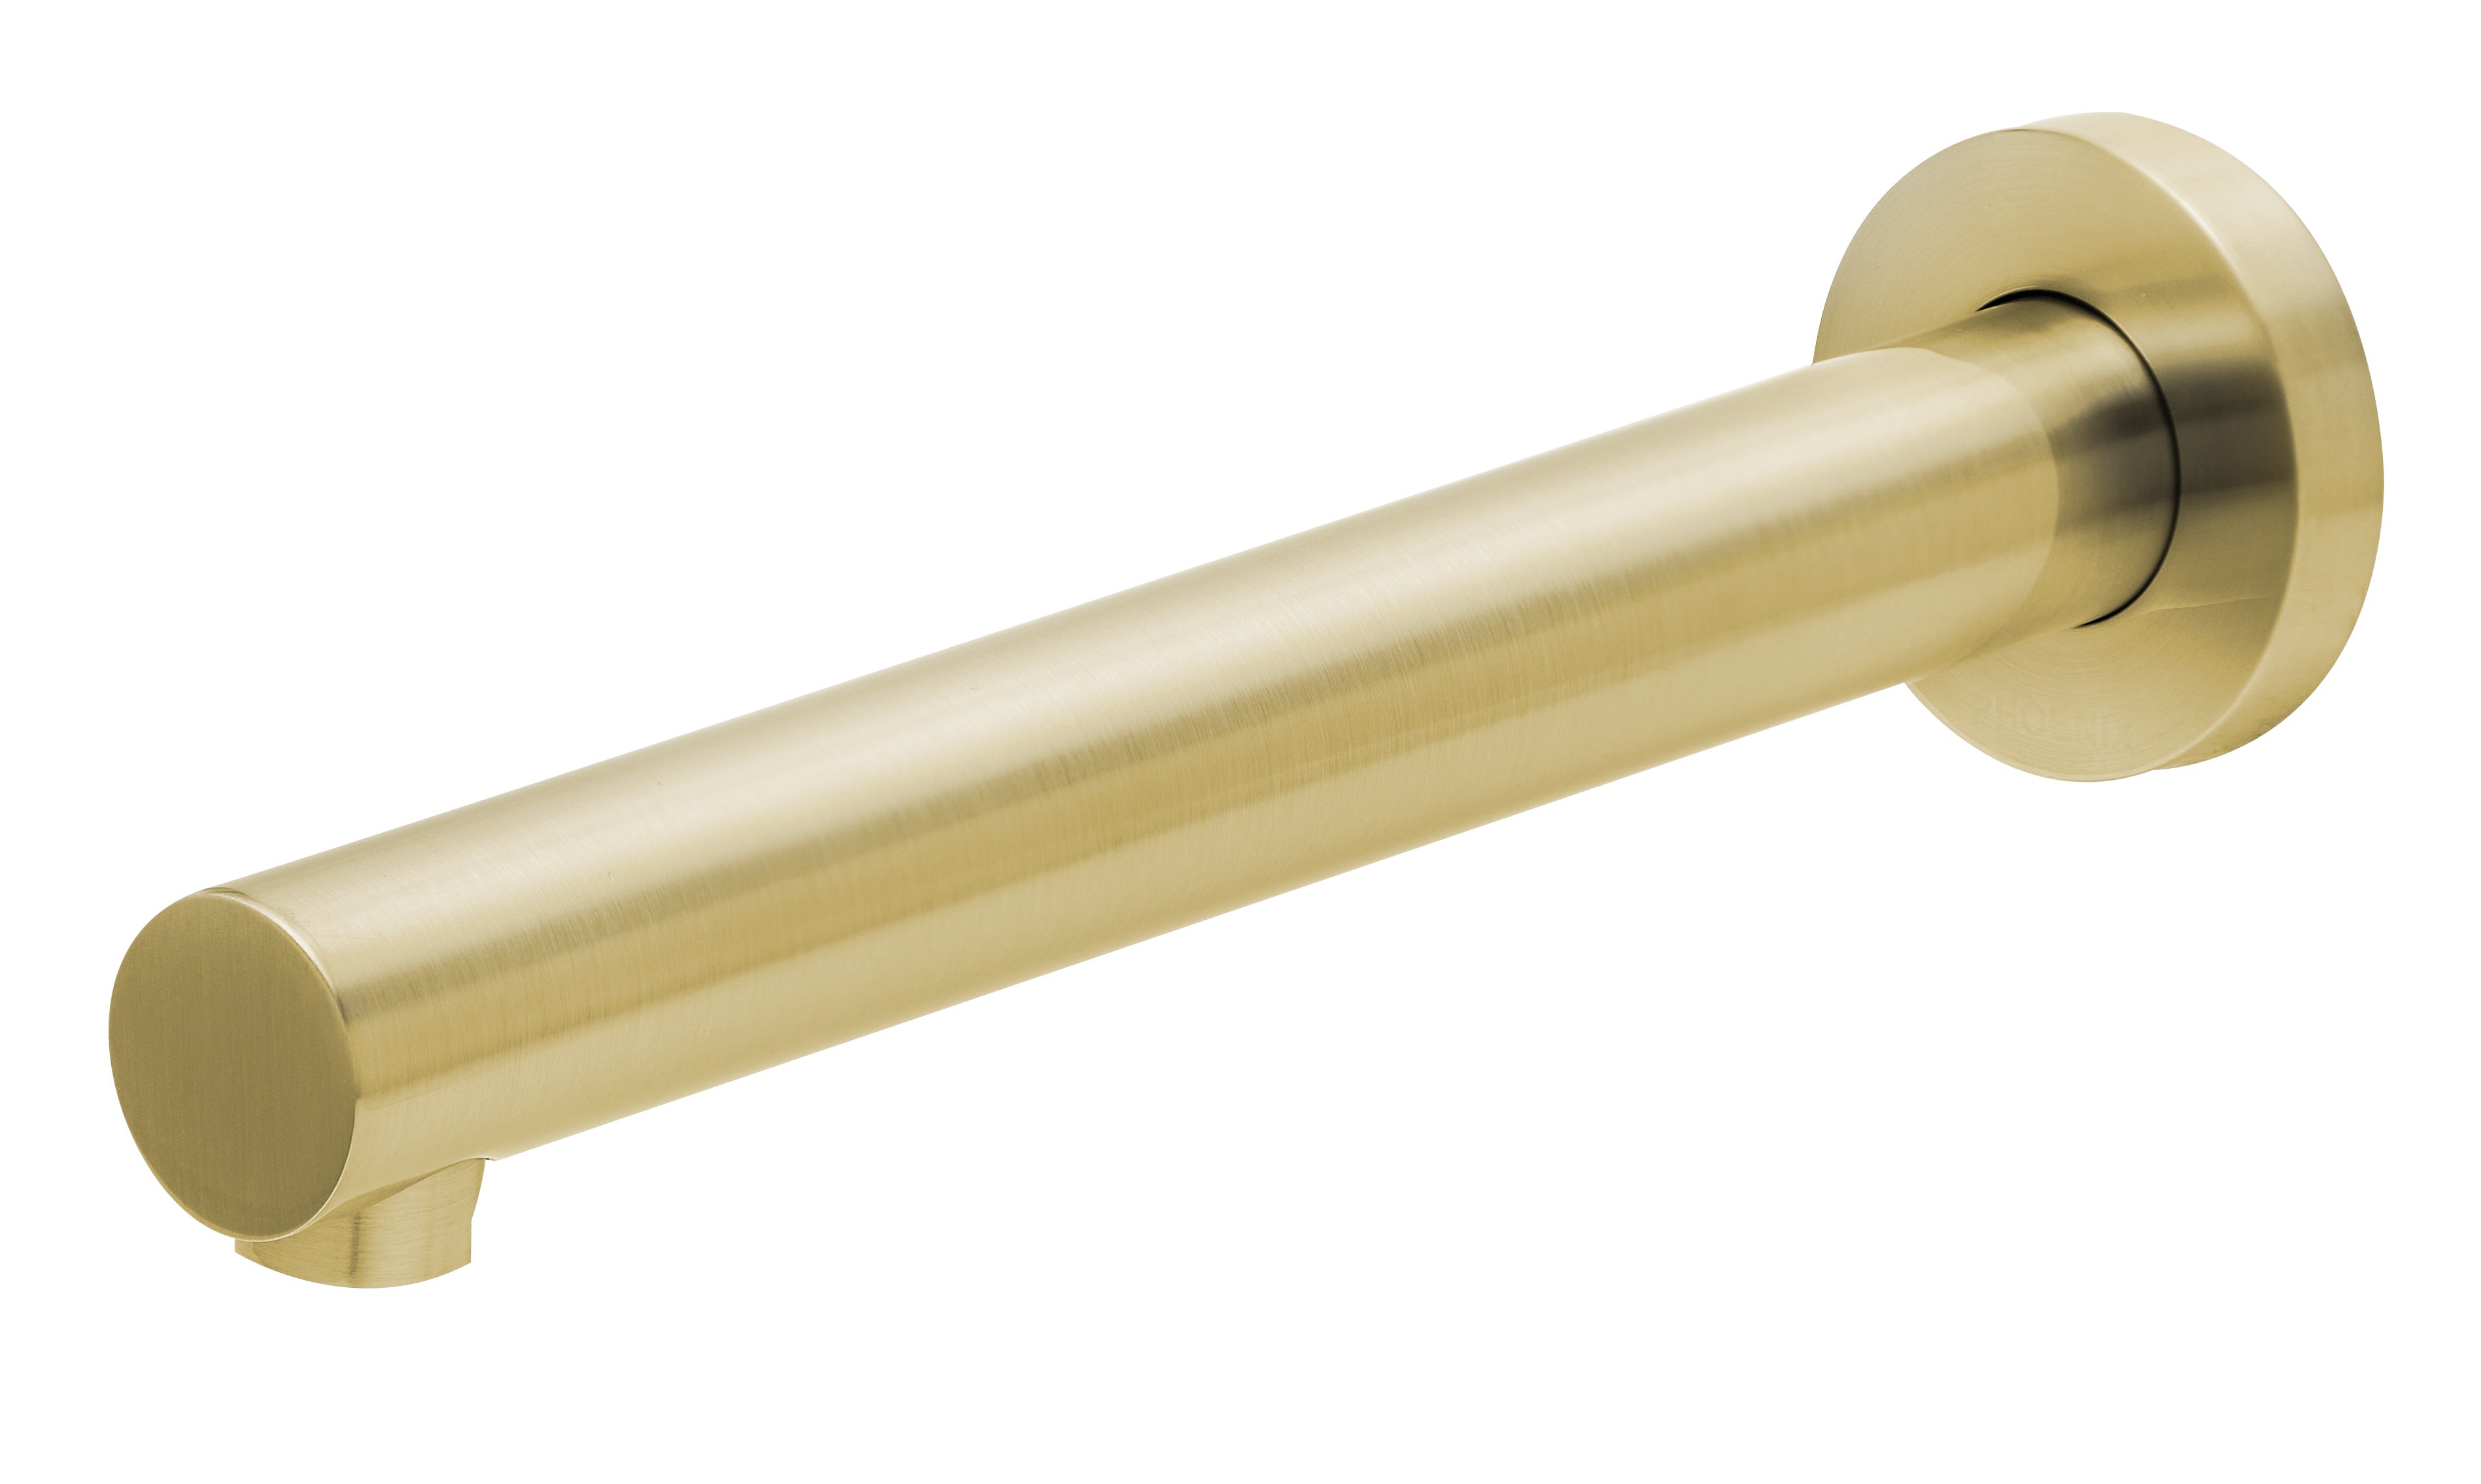 PHOENIX VIVID WALL BATH OUTLET 200MM BRUSHED GOLD